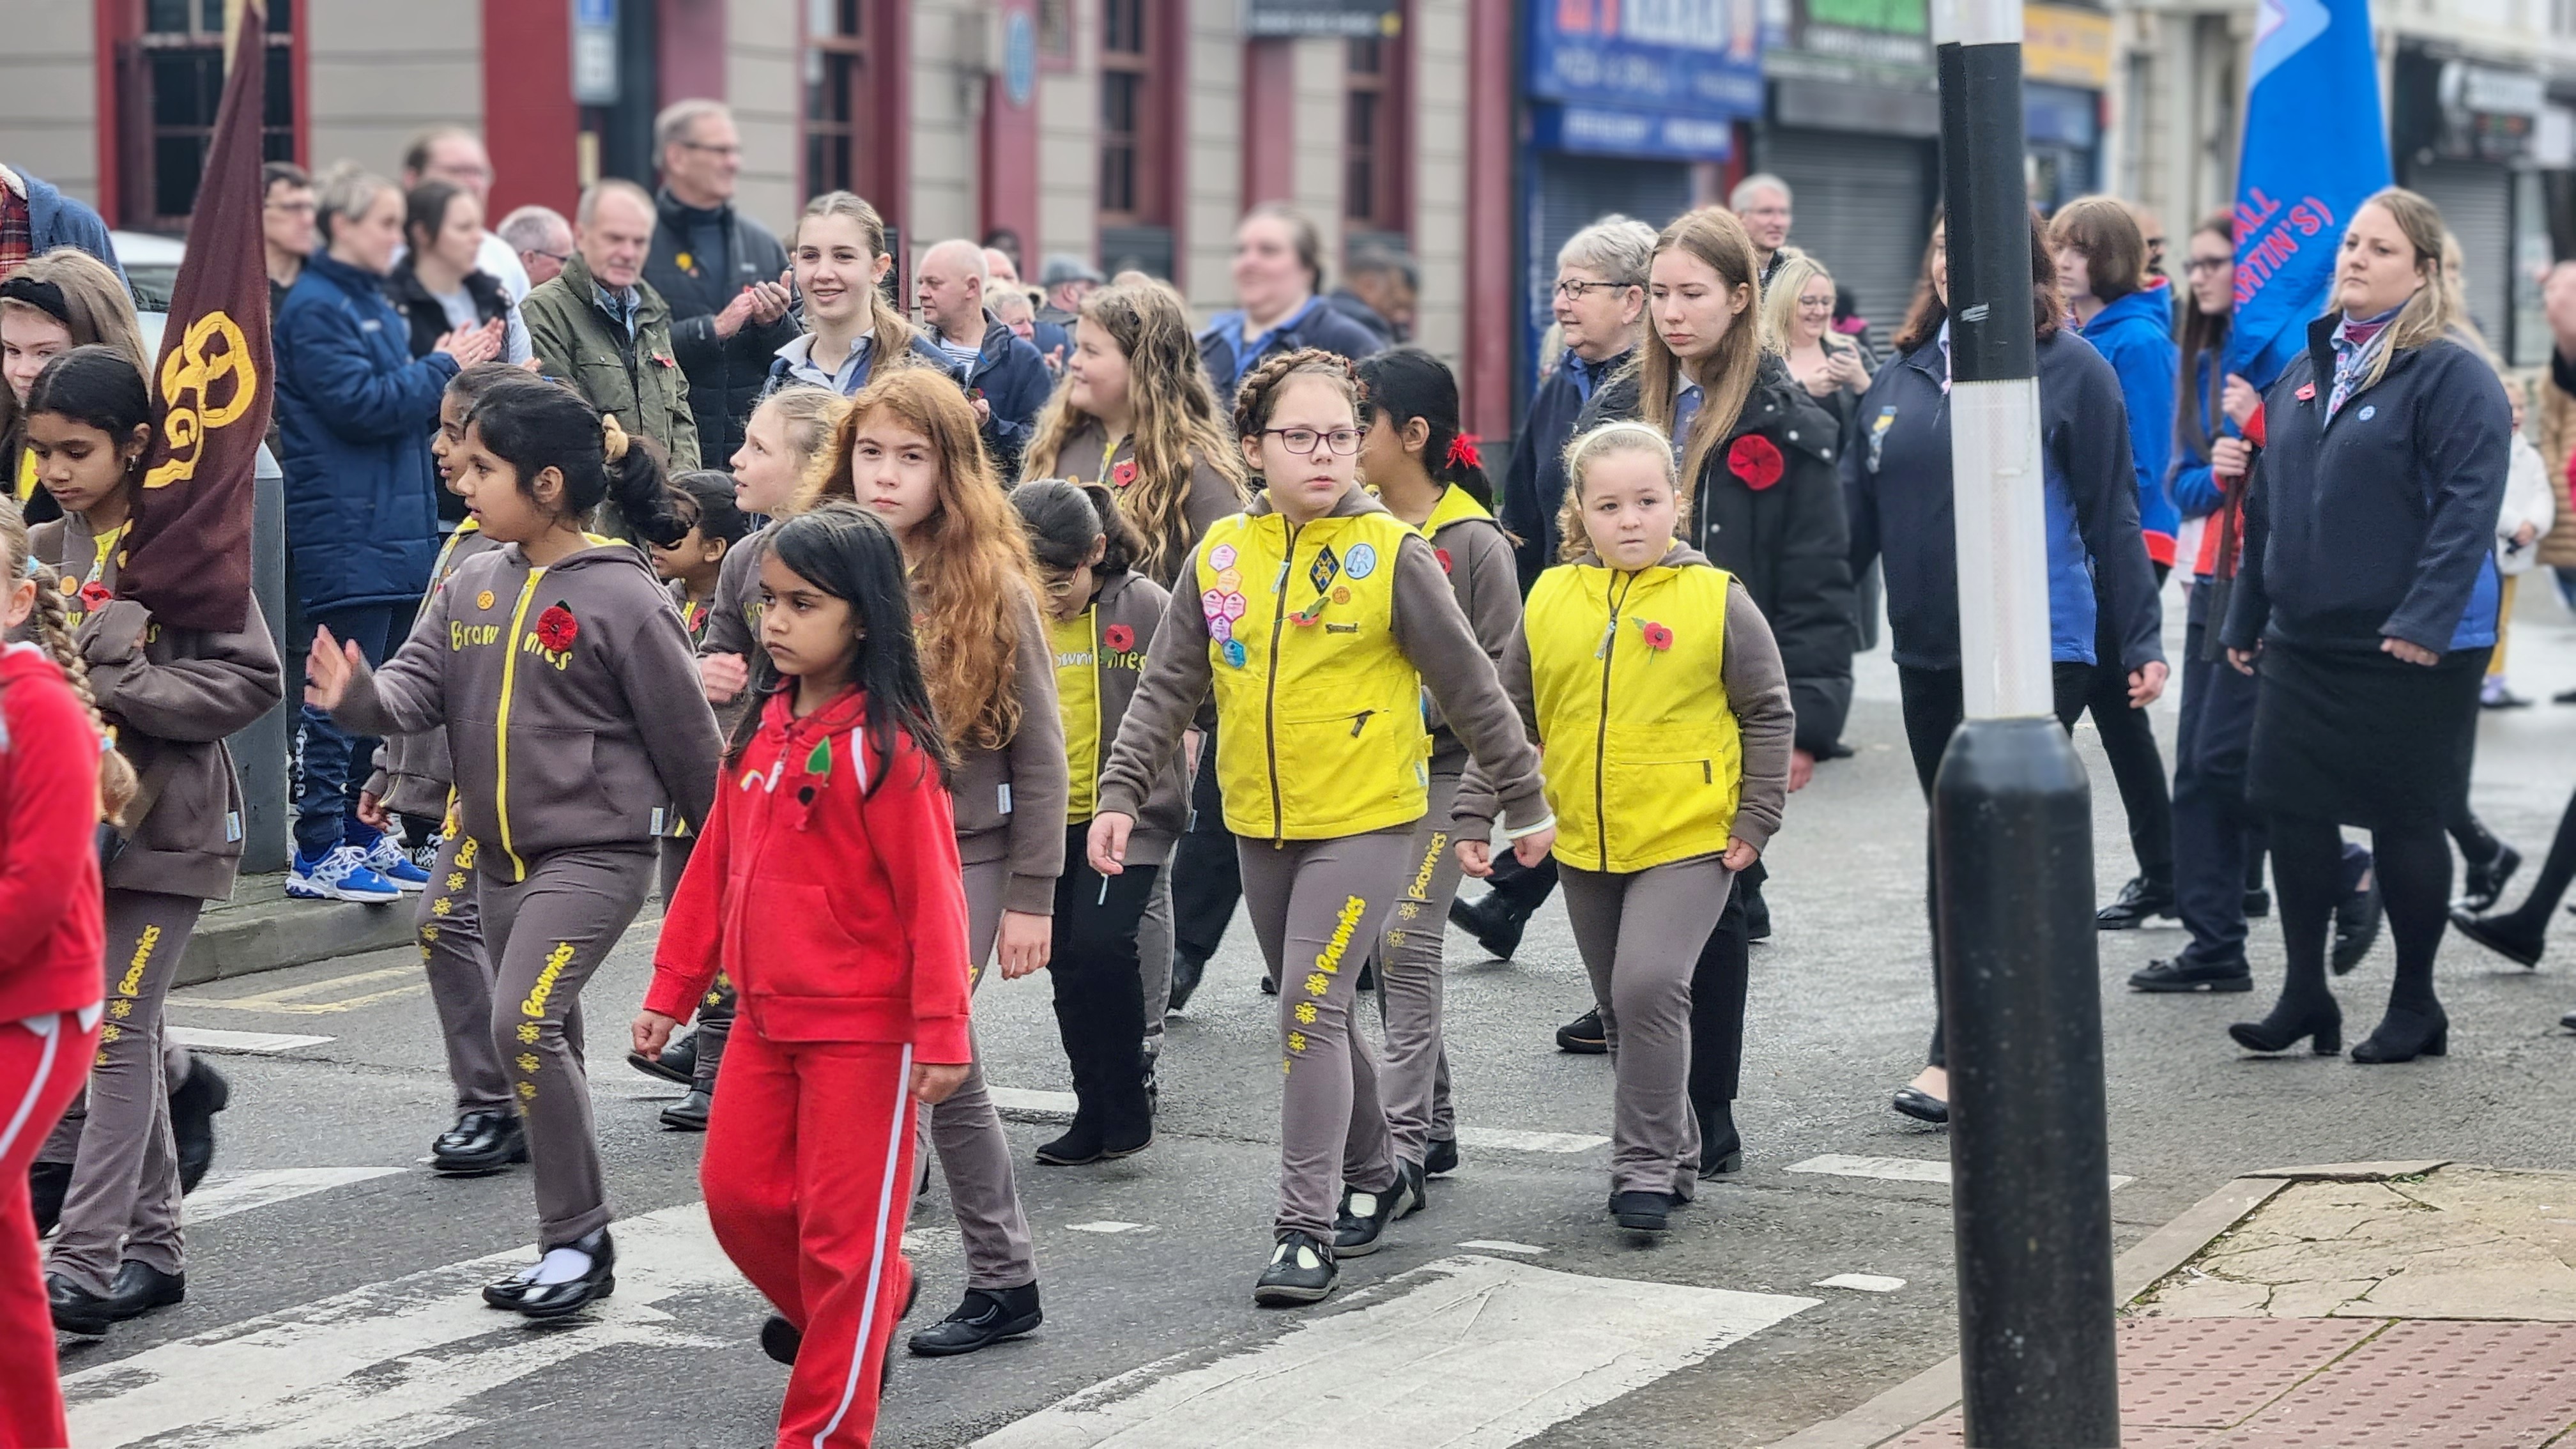 Members of the Brownies taking part in the parade